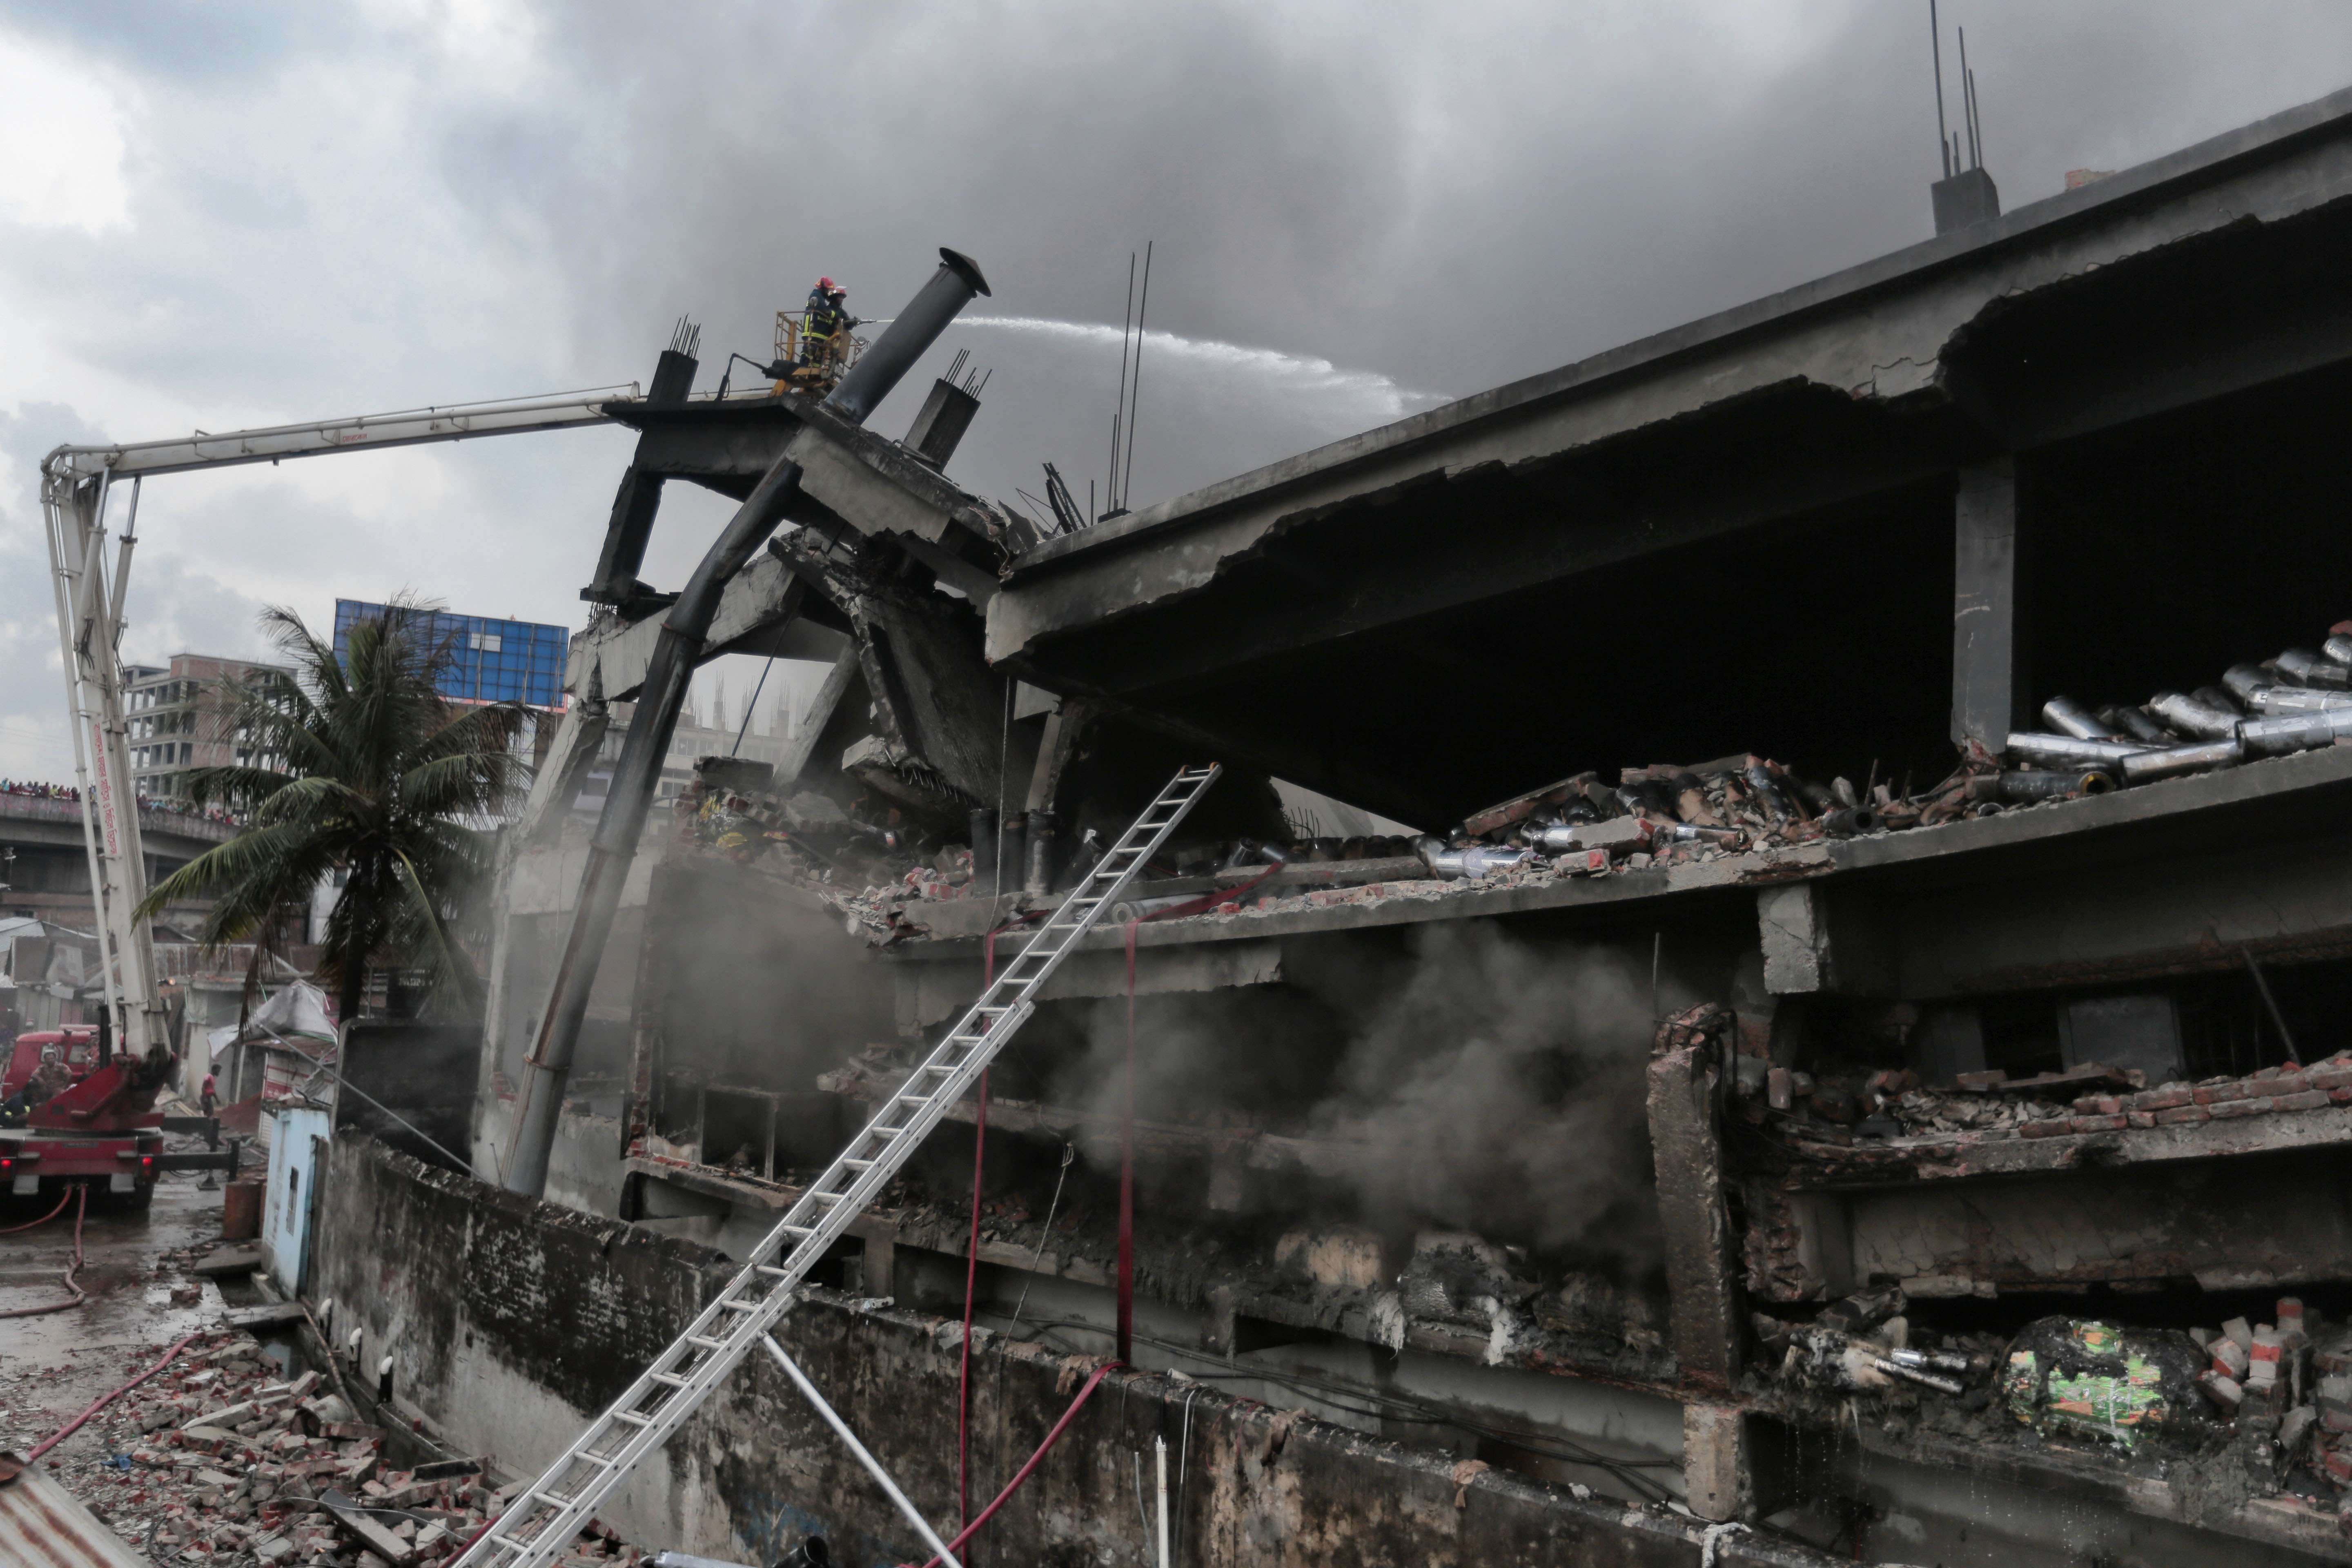 Firefighters work to put out a fire at Tampaco Foils factory in Tongi. Photo: AP